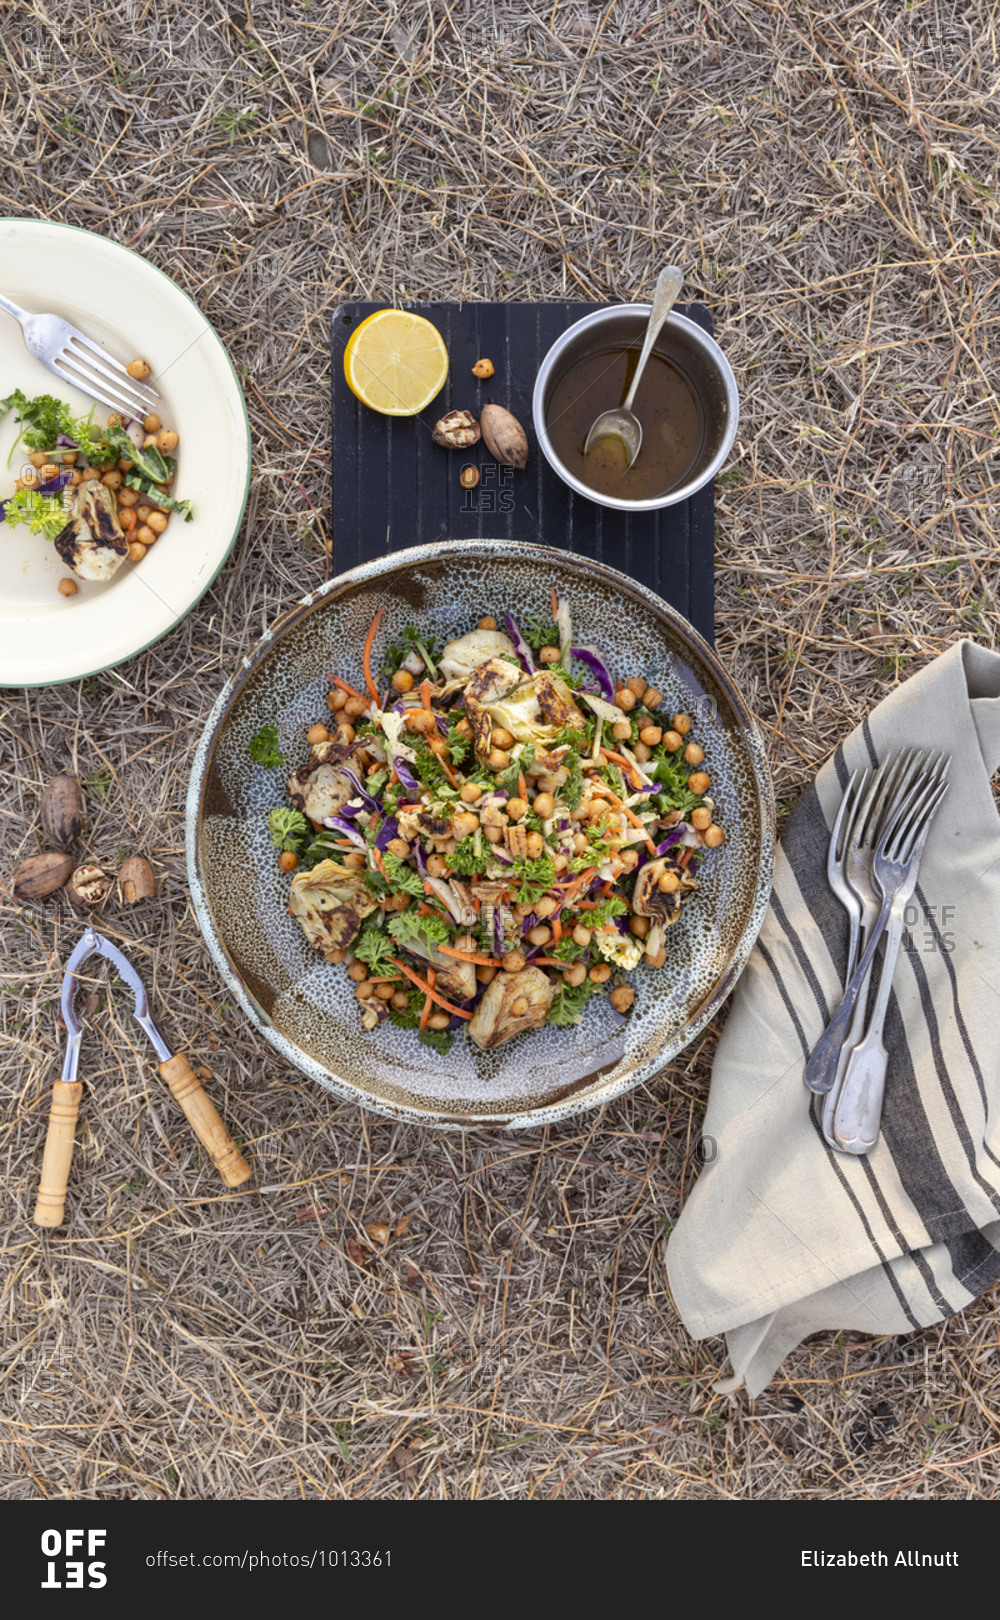 Overhead view of an artichoke and chickpea salad on ground outdoors